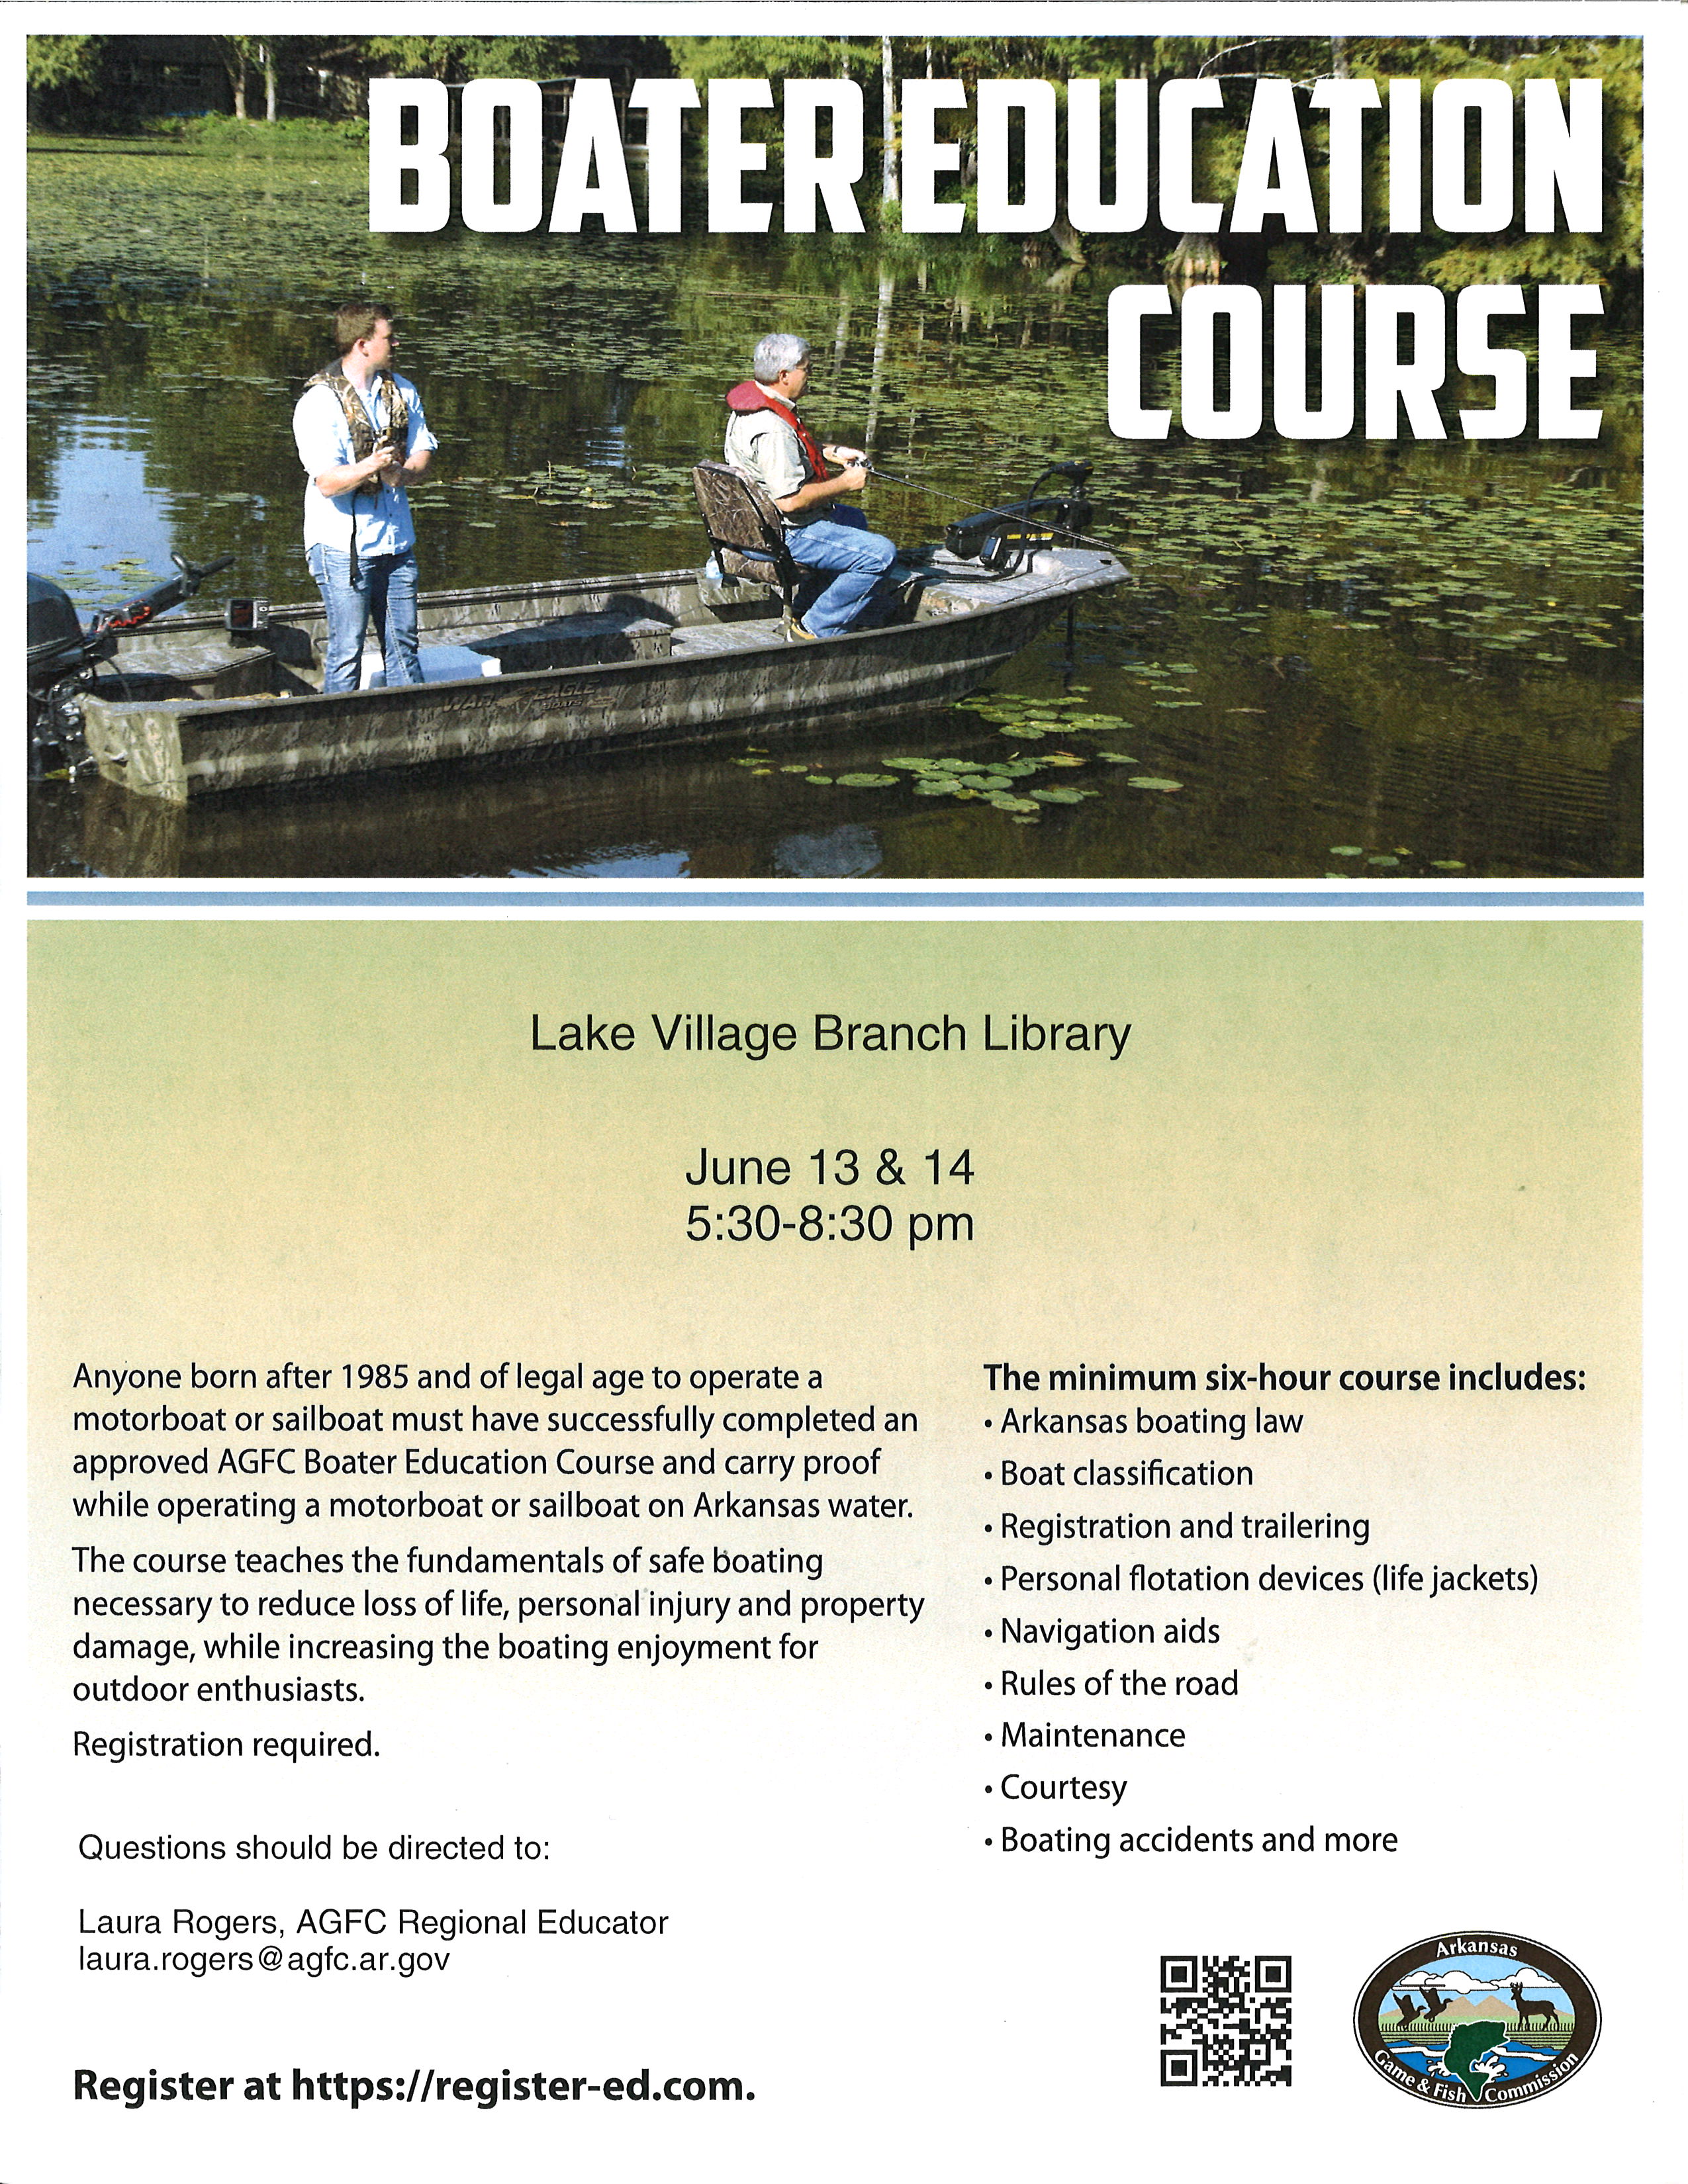 Boater Education Course